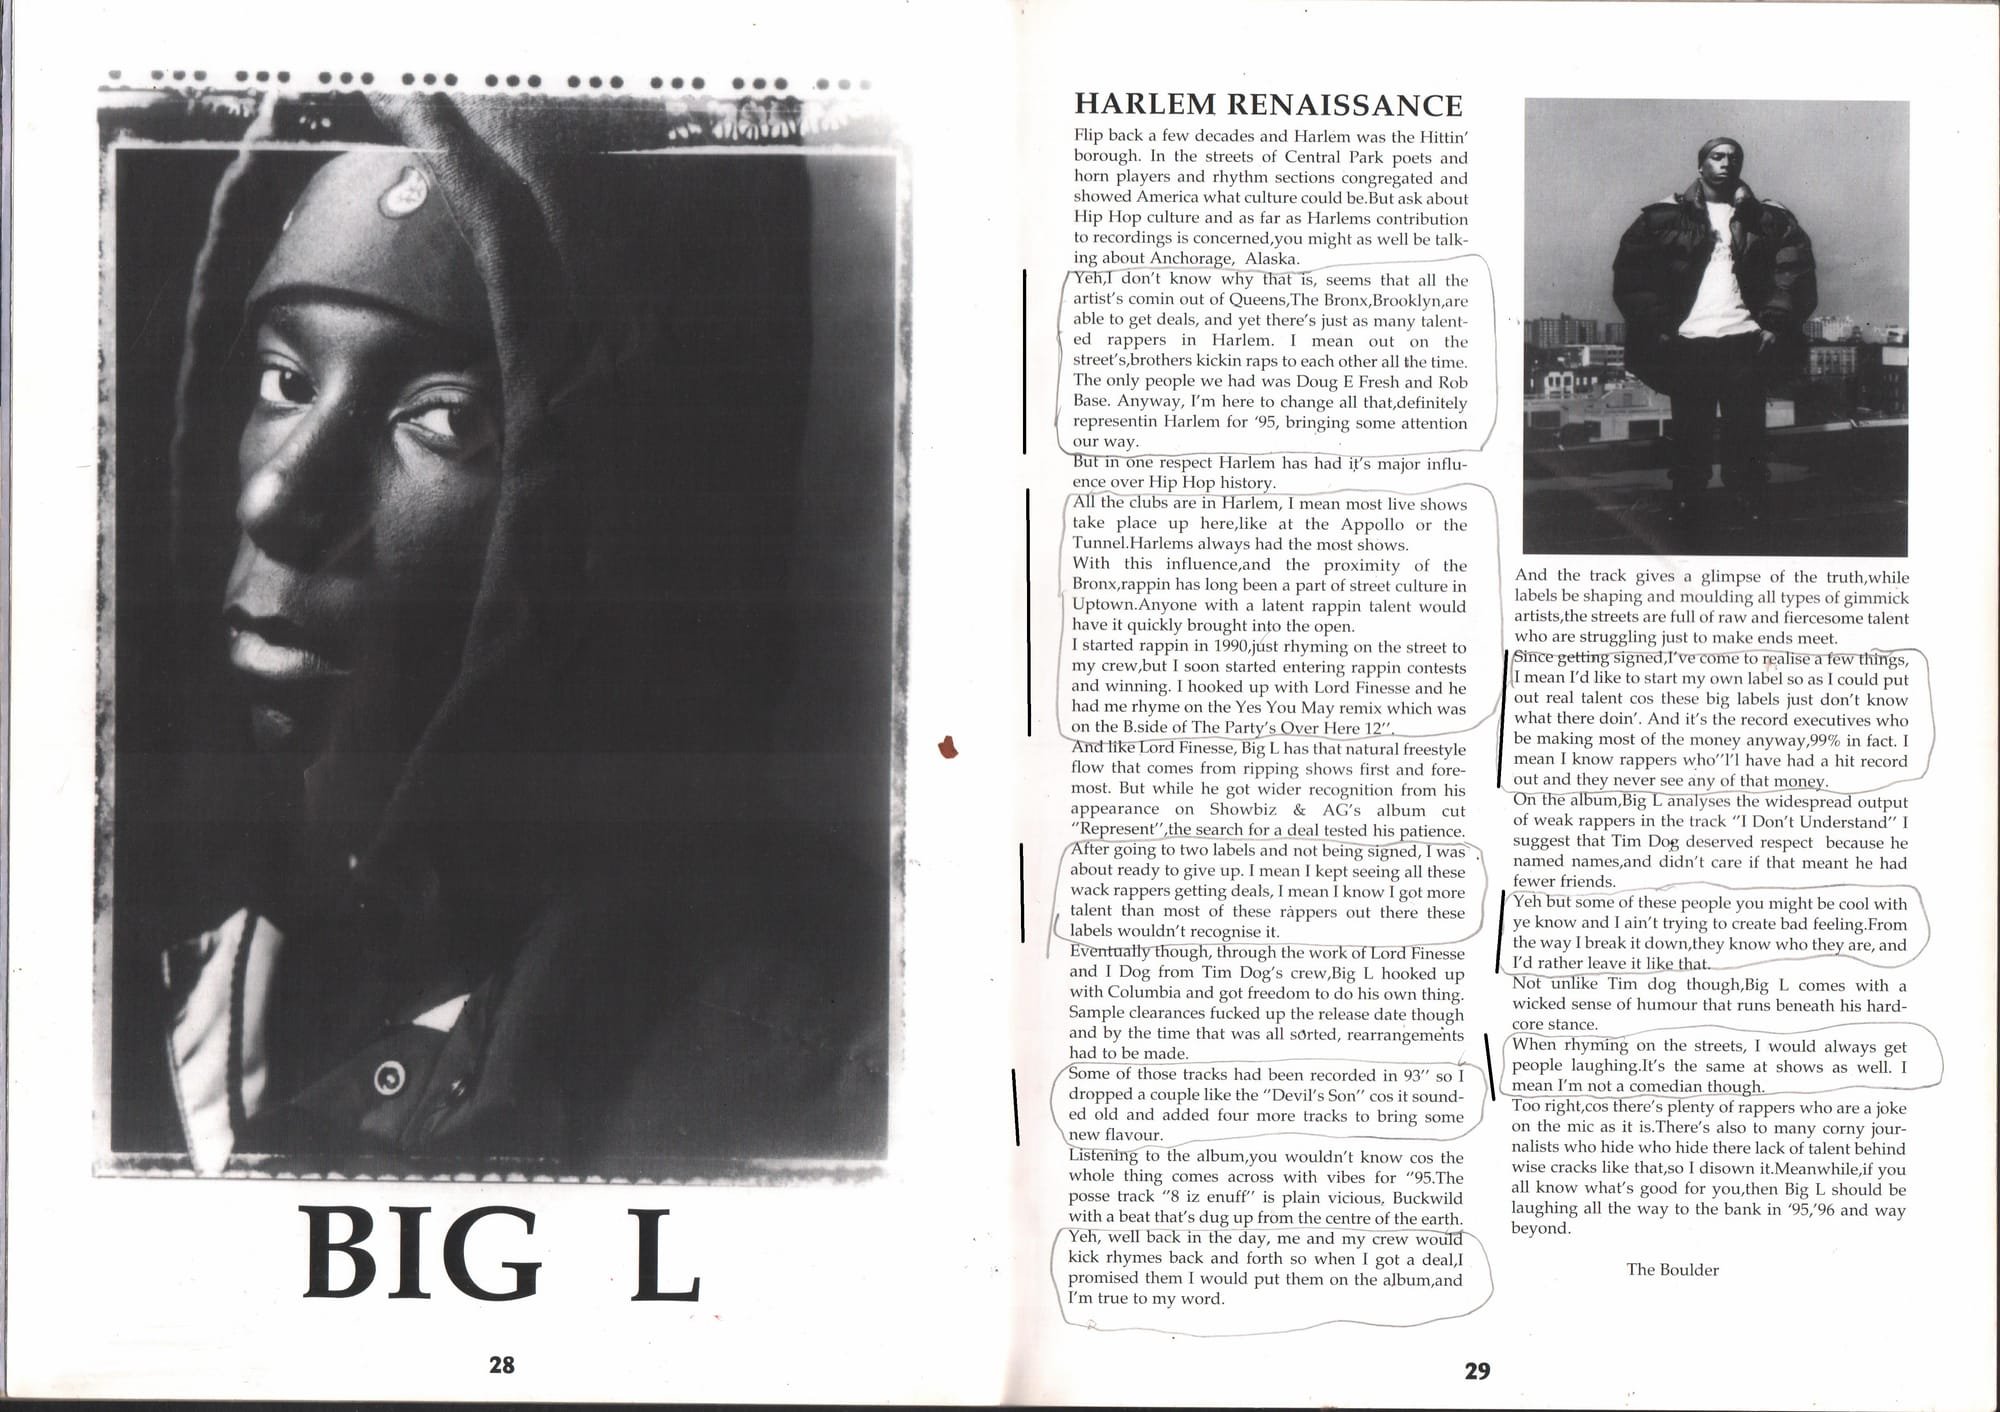 Interview with Big L on the release of his debut LP